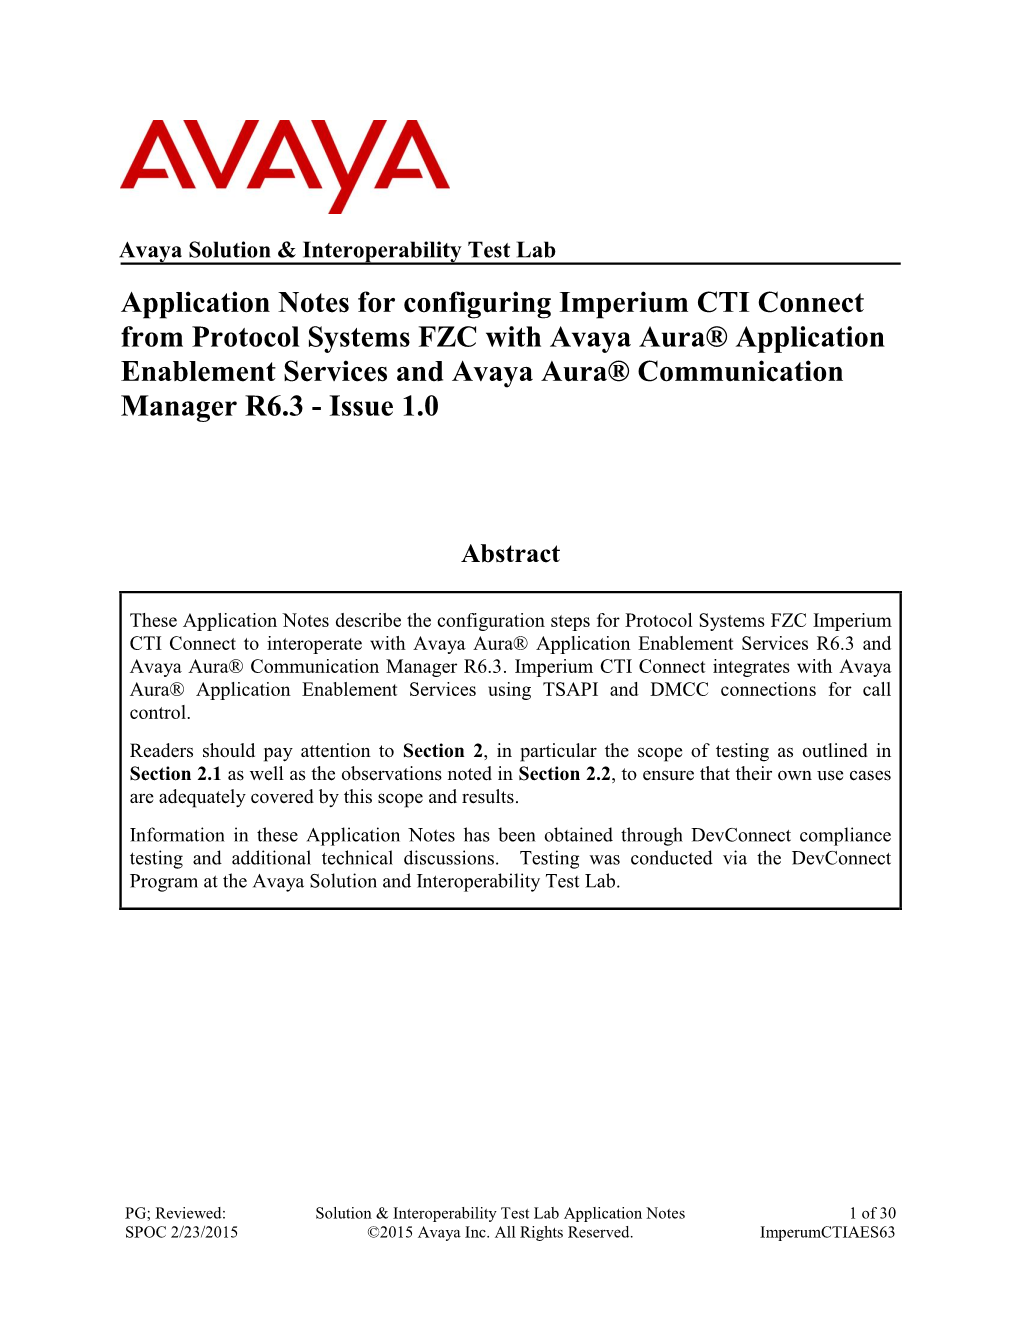 Application Notes for Configuring Imperium CTI Connect from Protocol Systems FZC with Avaya Aura® Application Enablement Servic